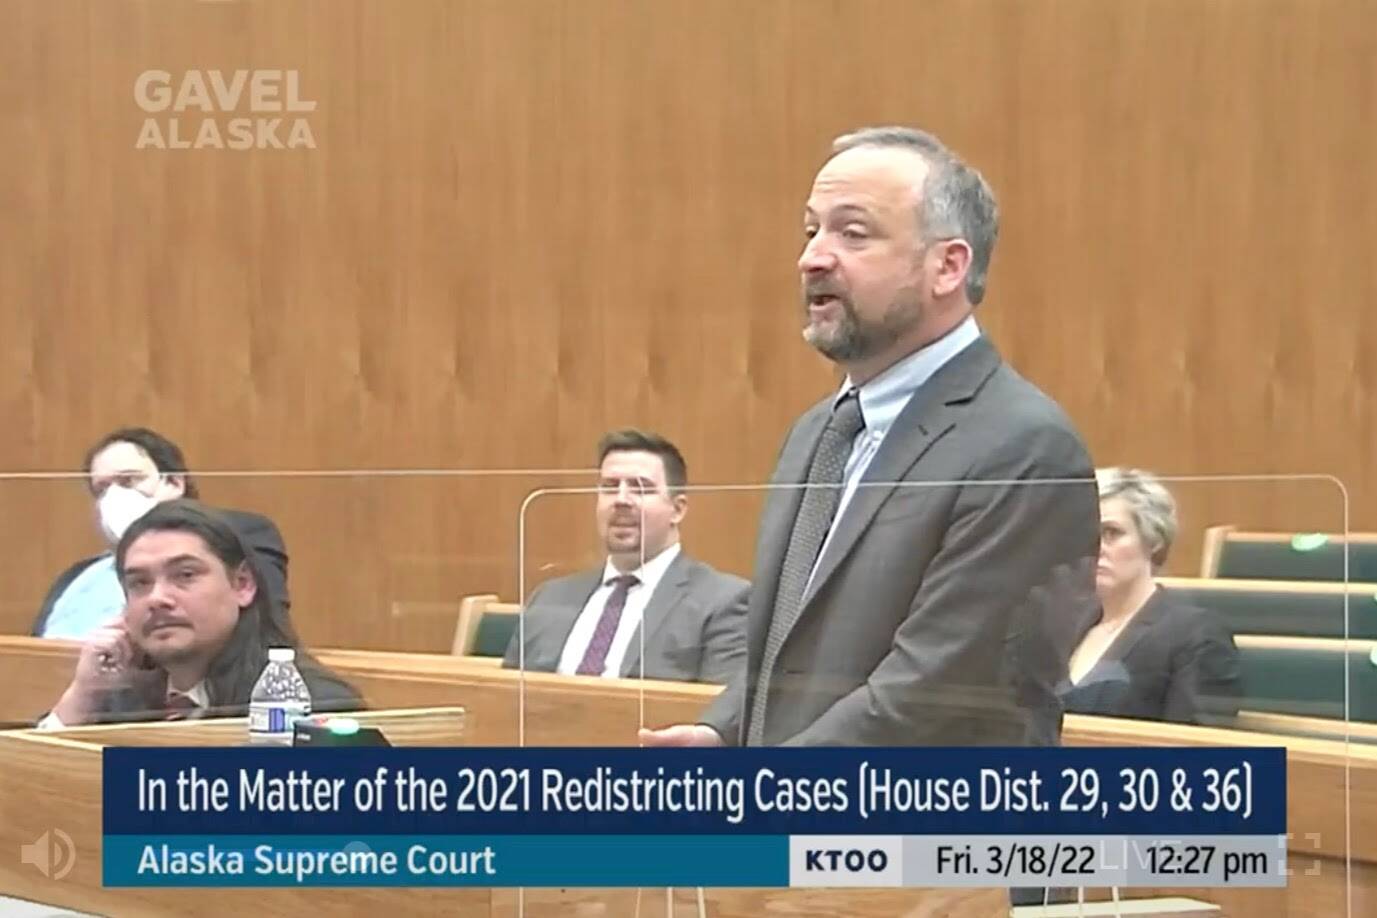 Attorney for the State of Alaska Matthew Singer defends the Alaska Redistricting Board to the Alaska Supreme Court on Friday, March 18, 2022. The Court will return a decision on the state's new electoral districts by April 1. (Screenshot)